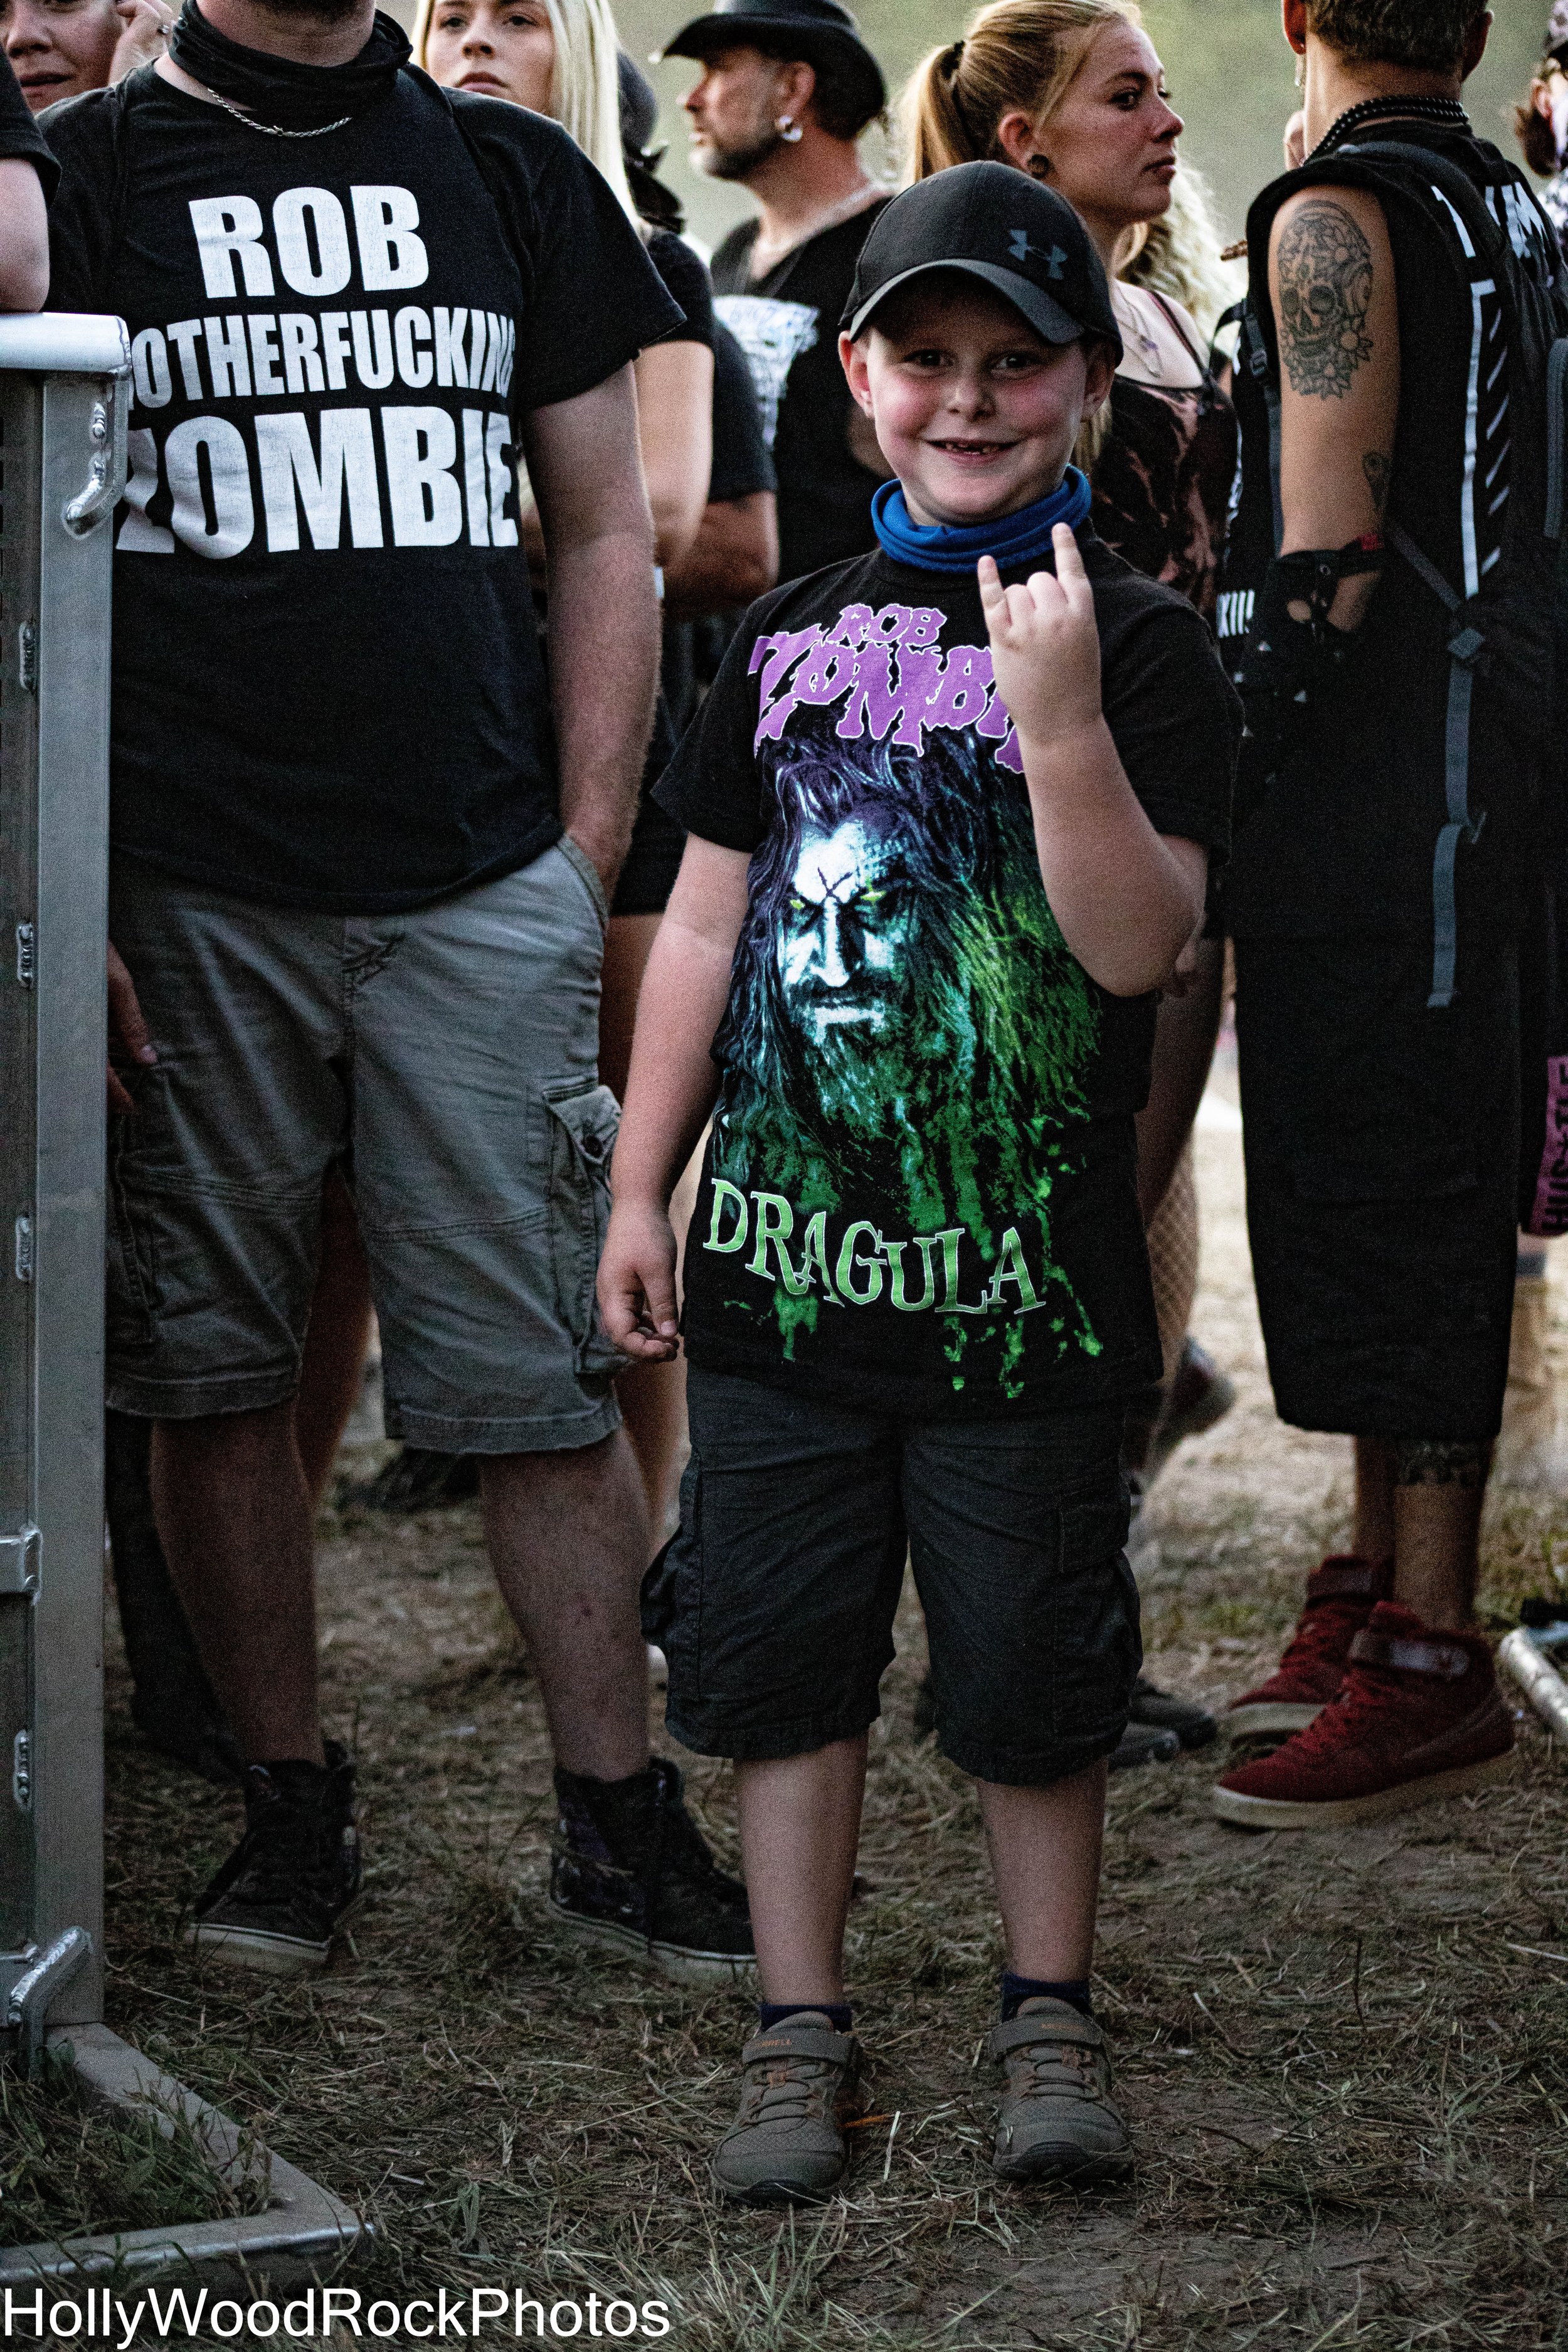 A Young Rob Zombie Fan Throws the Horns at Blue Ridge Rock Festival by Holly Williams